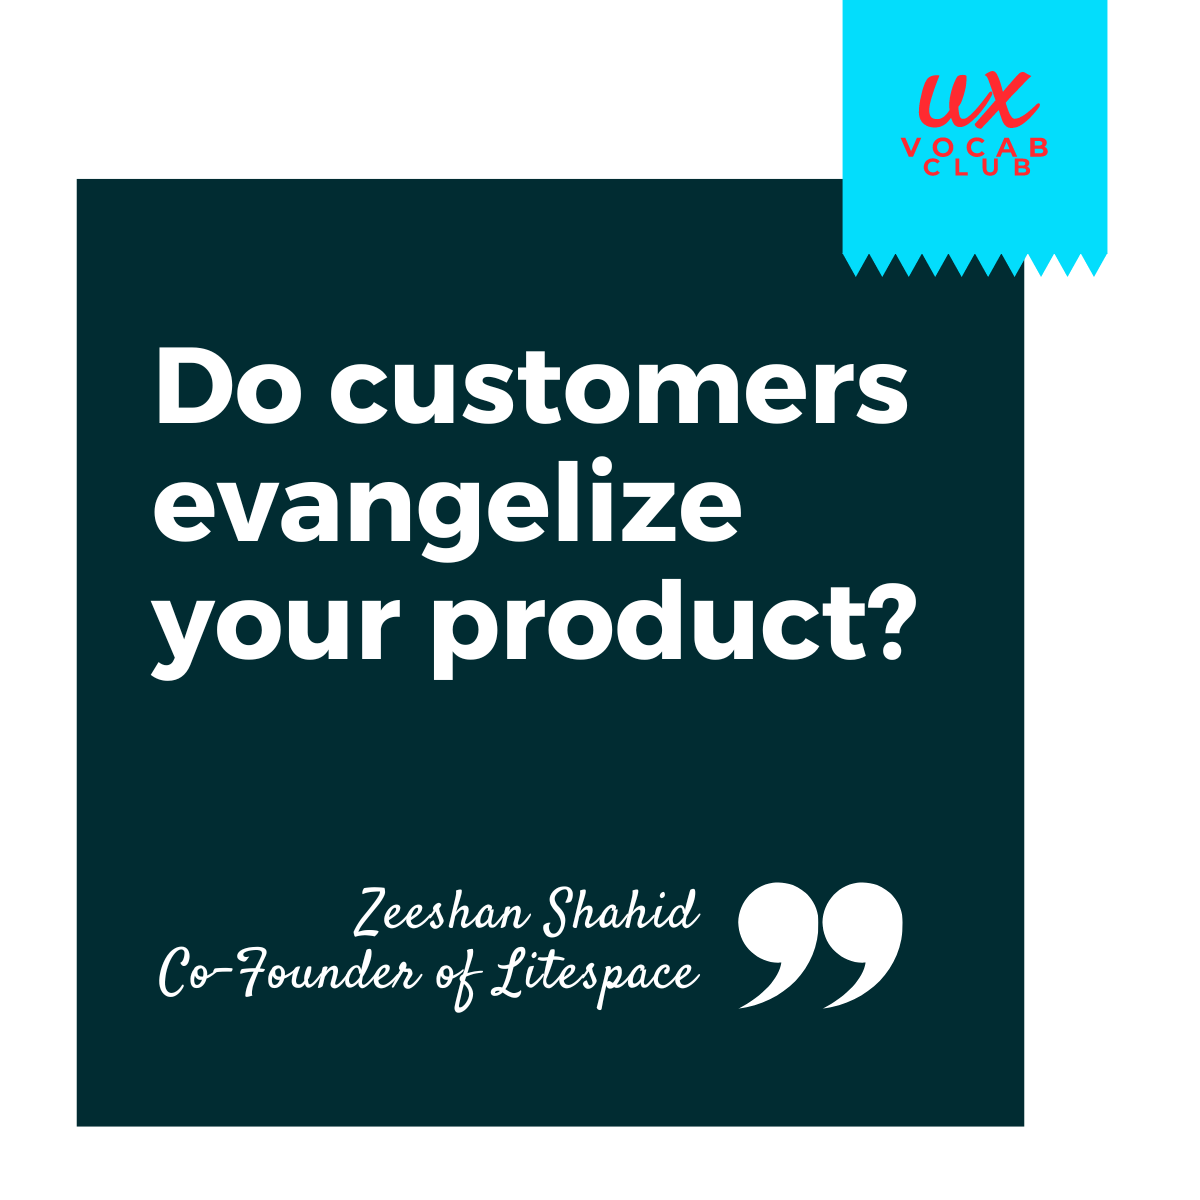 Quote from Zeeshan Shahid, Co-founder of Litespace.